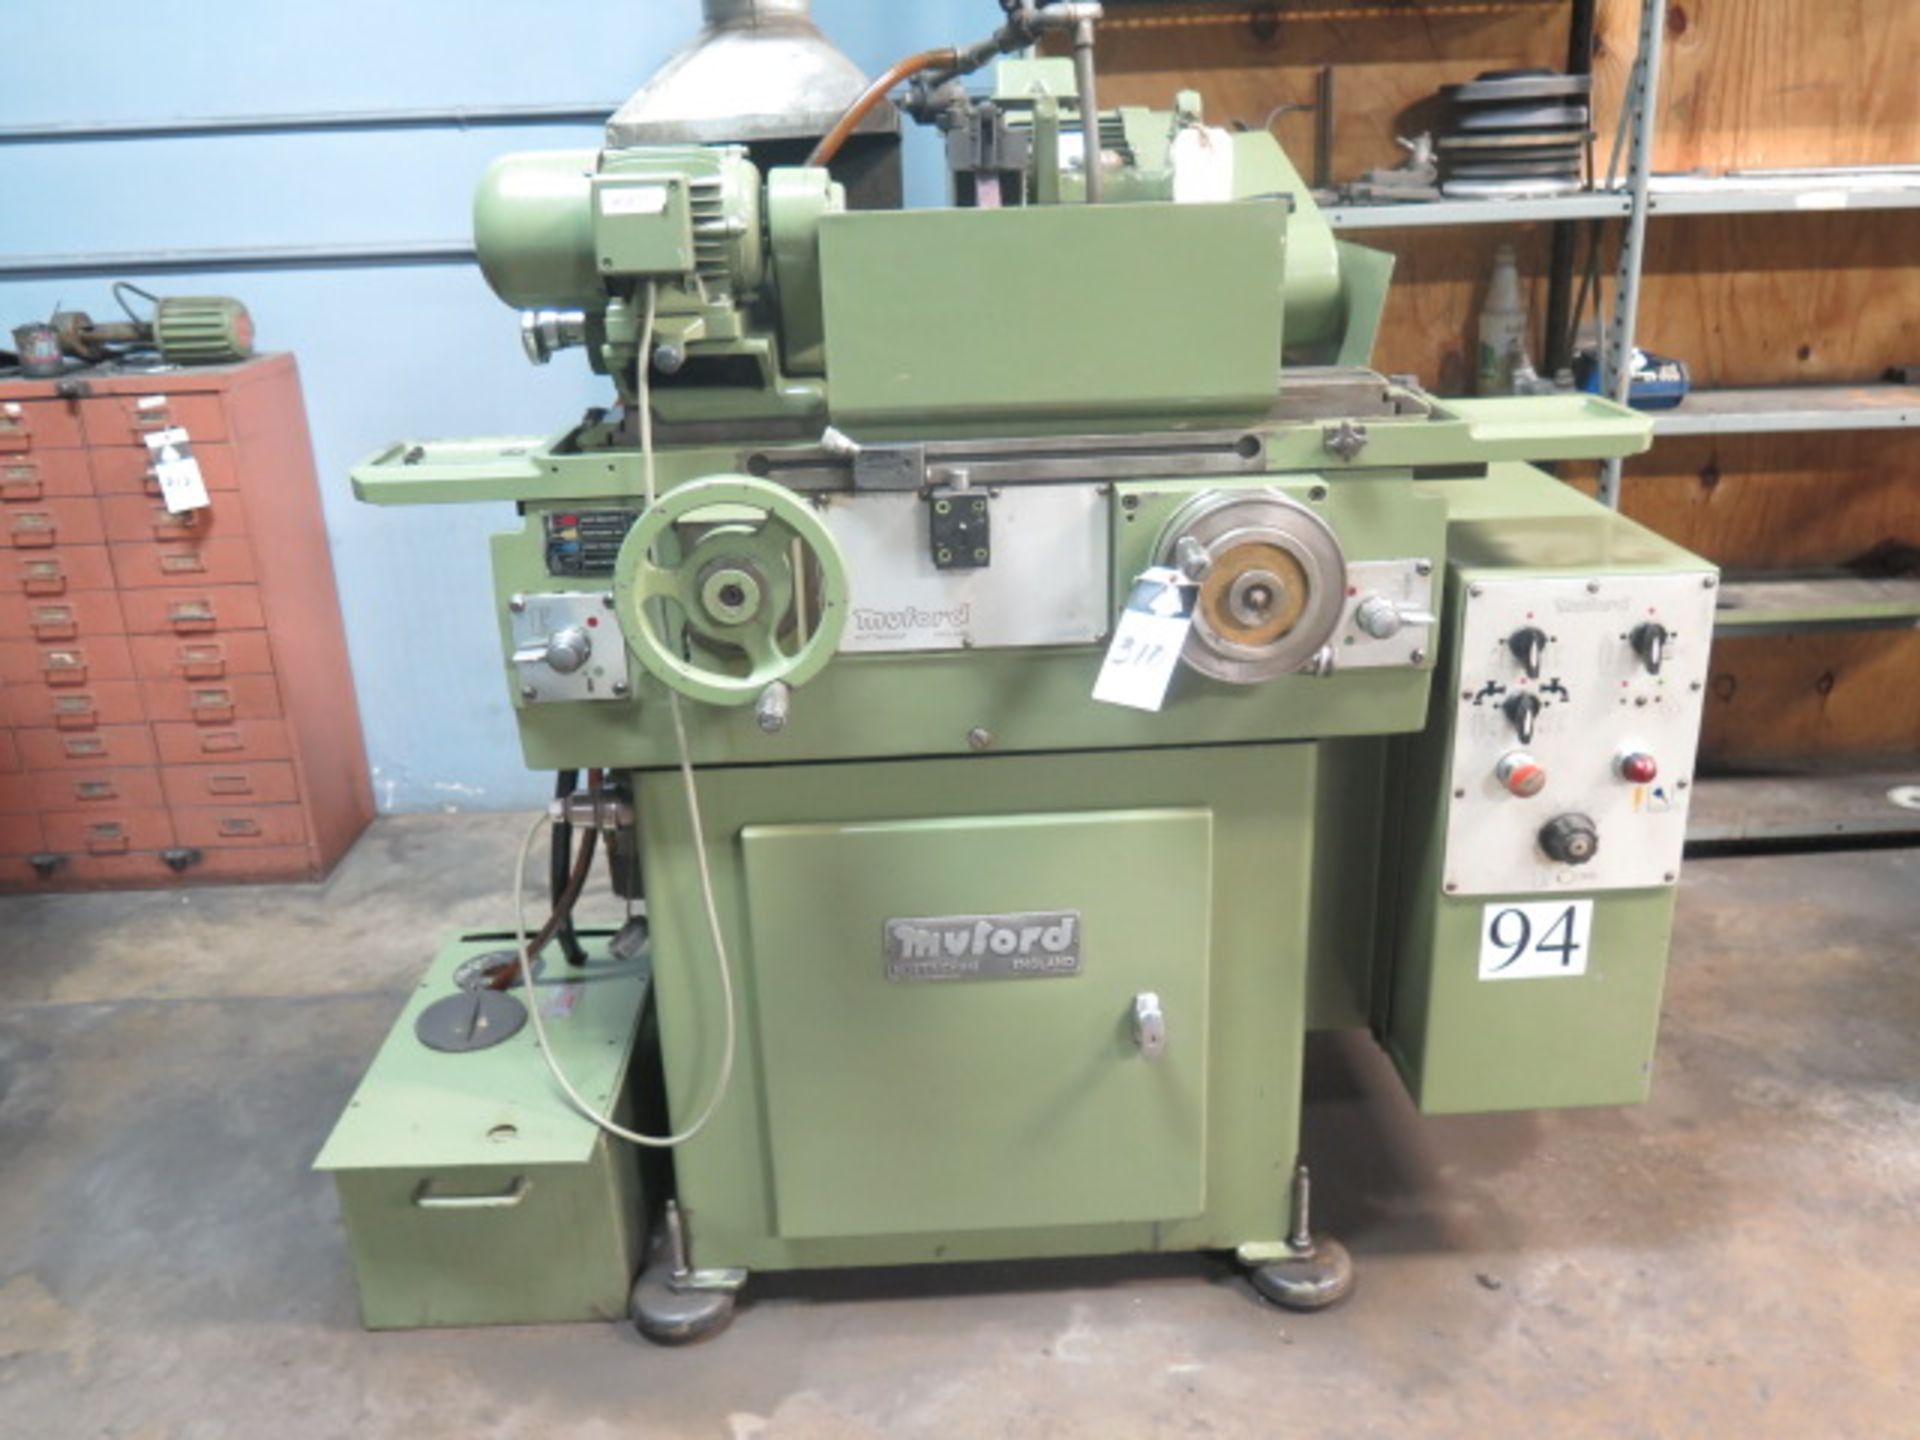 Myford MG12-M 5” x 12” Universal Cylindrical Grinder s/n SM157324 w/ Motorized Work Head, Tailstock,